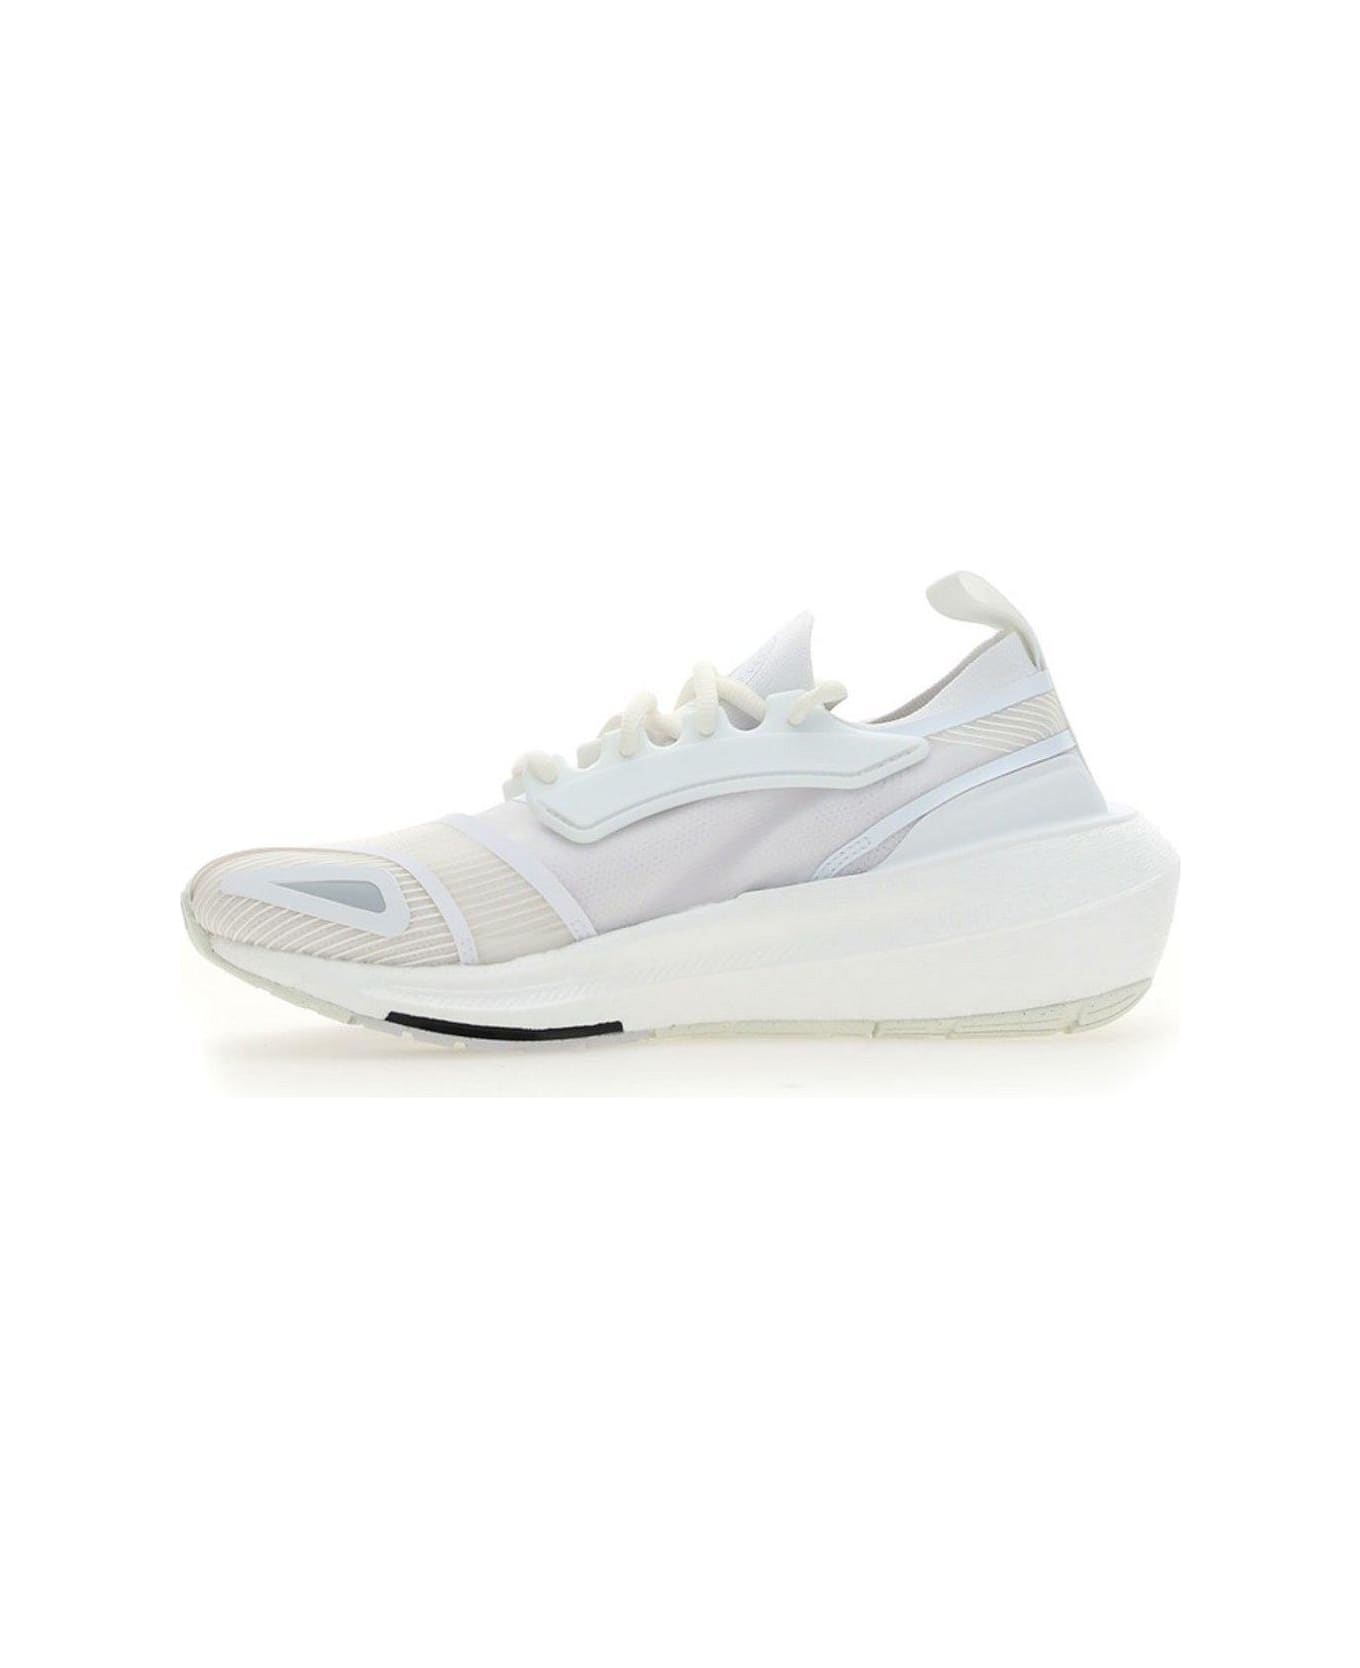 Adidas by Stella McCartney Ultraboost Light Lace-up Sneakers - White スニーカー